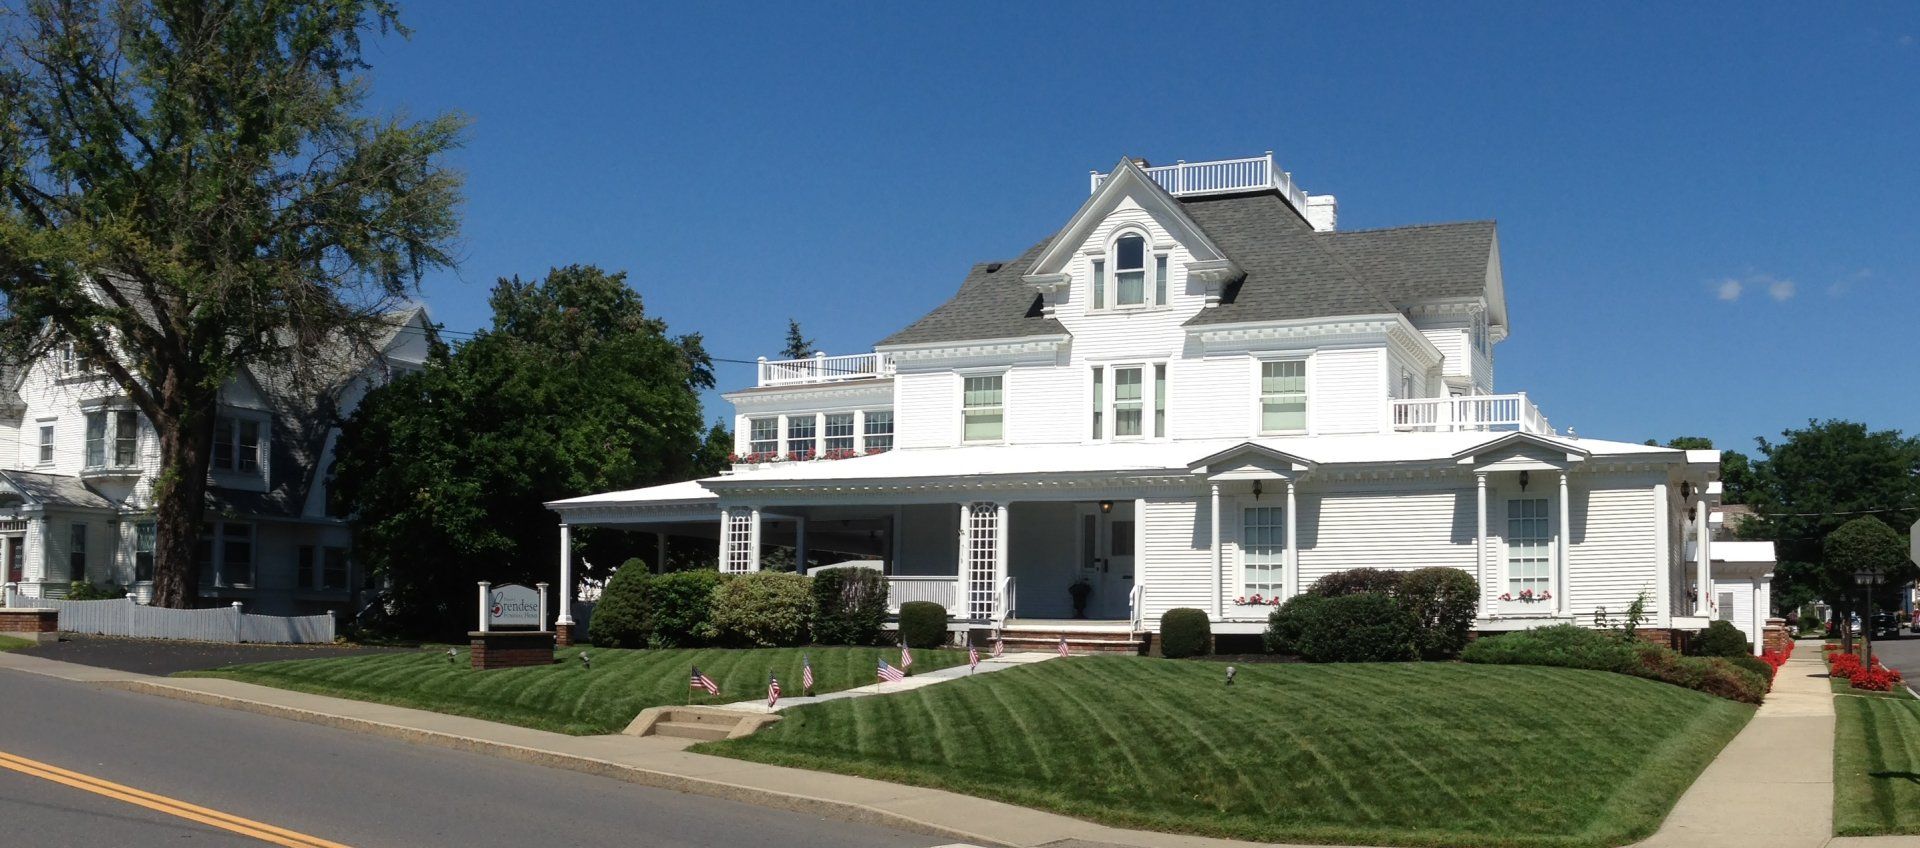 Front View of Brendese Funeral Home, Clifton Park & Albany NY